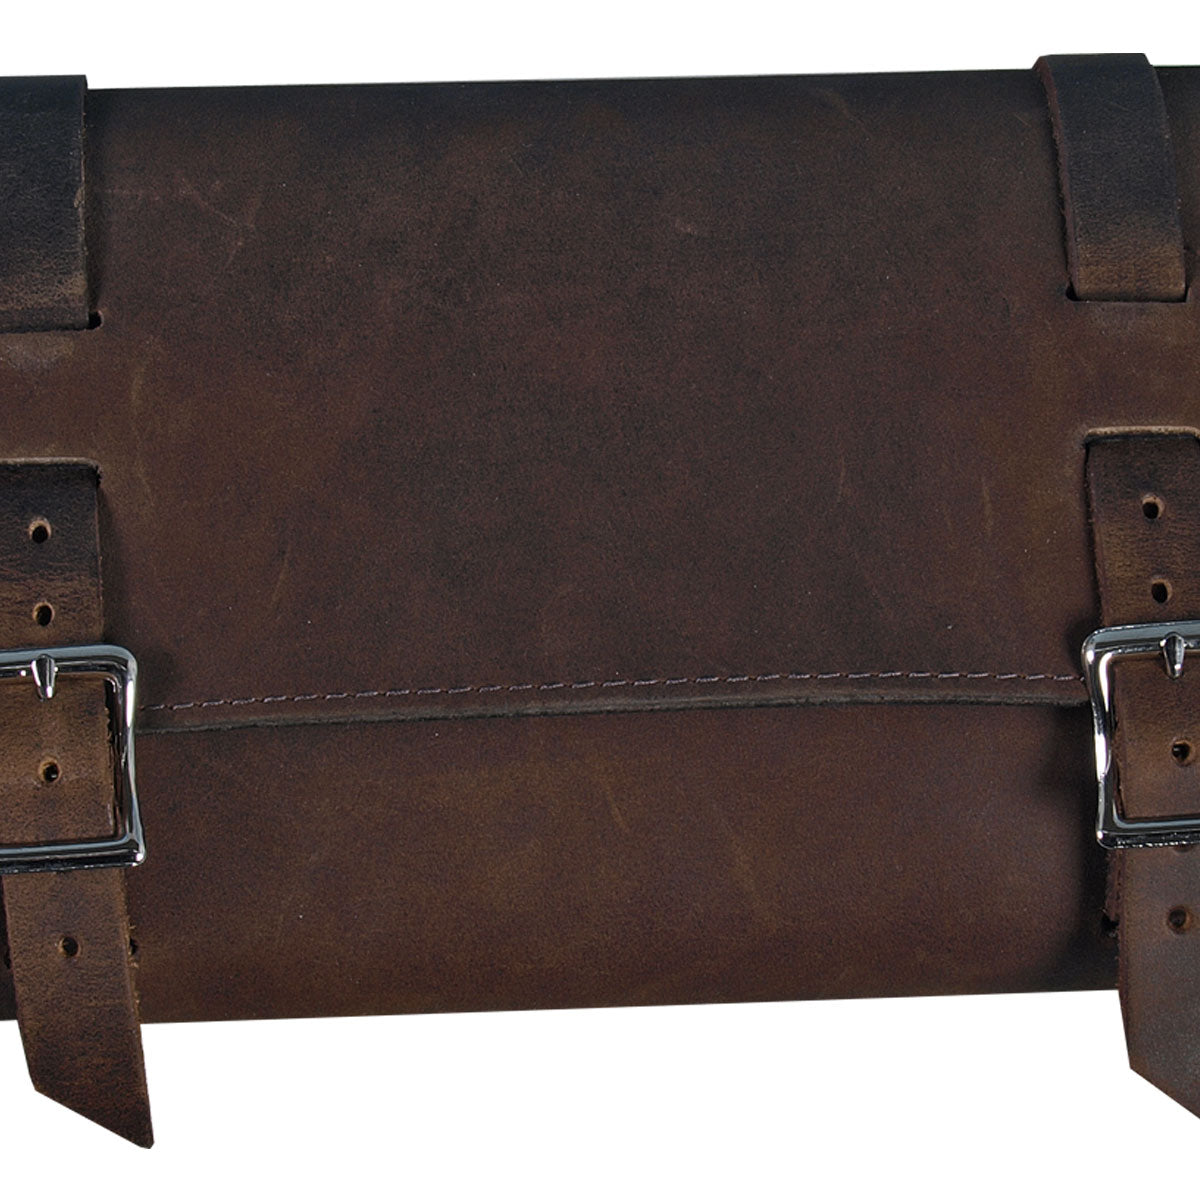 Hot Leathers TBC1011 Medium Distressed Brown Leather Tool Bag 10X6